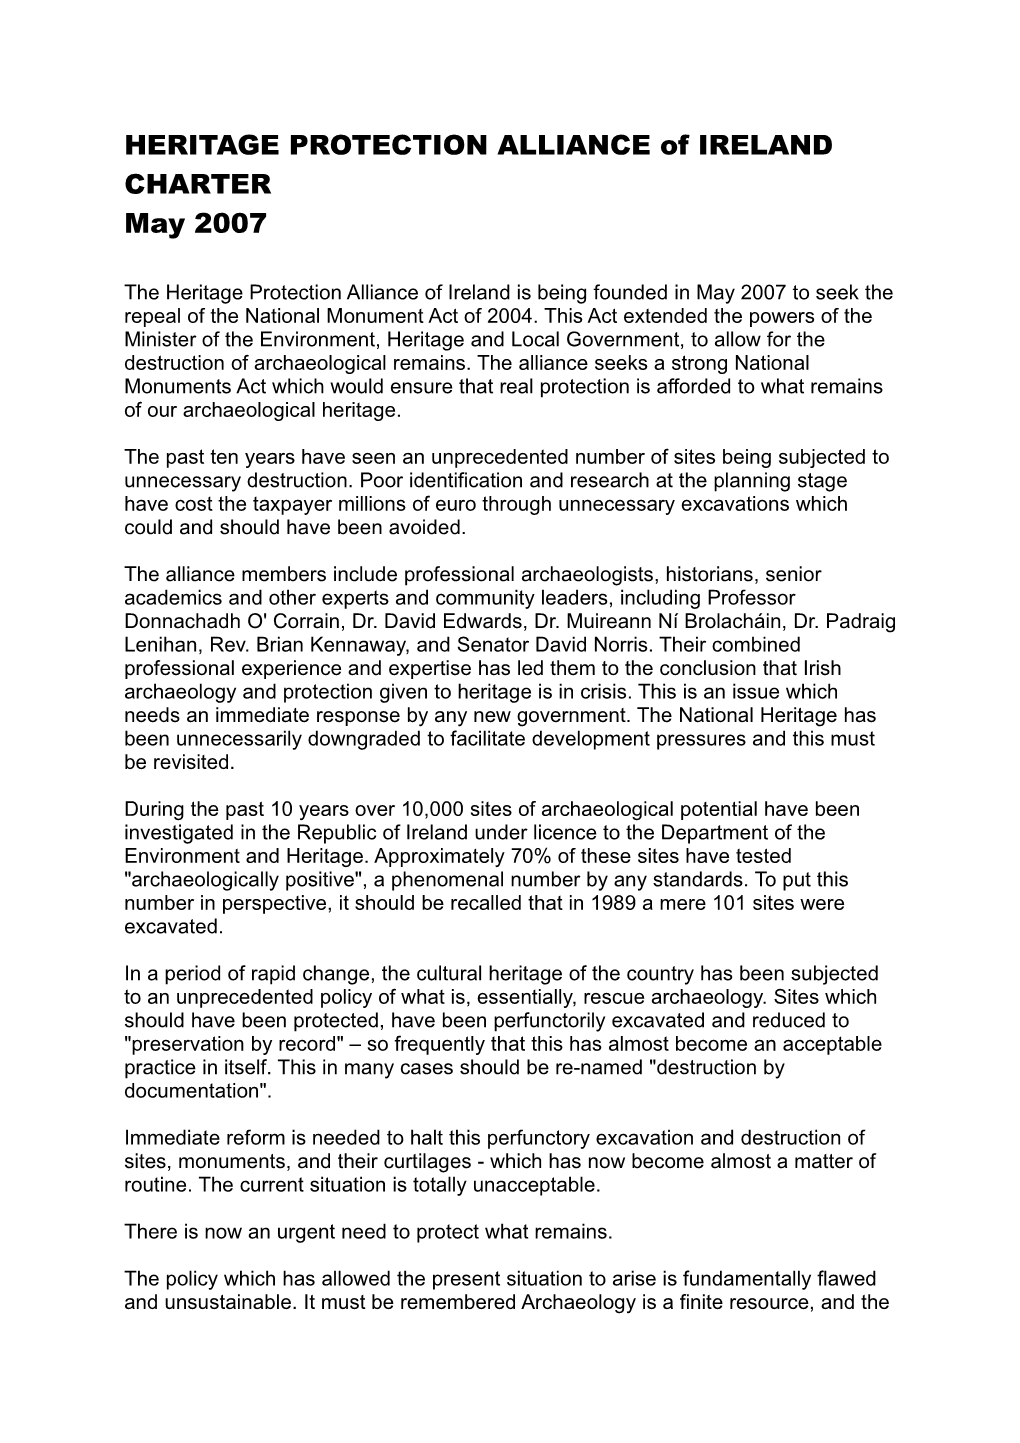 HERITAGE PROTECTION ALLIANCE of IRELAND CHARTER May 2007